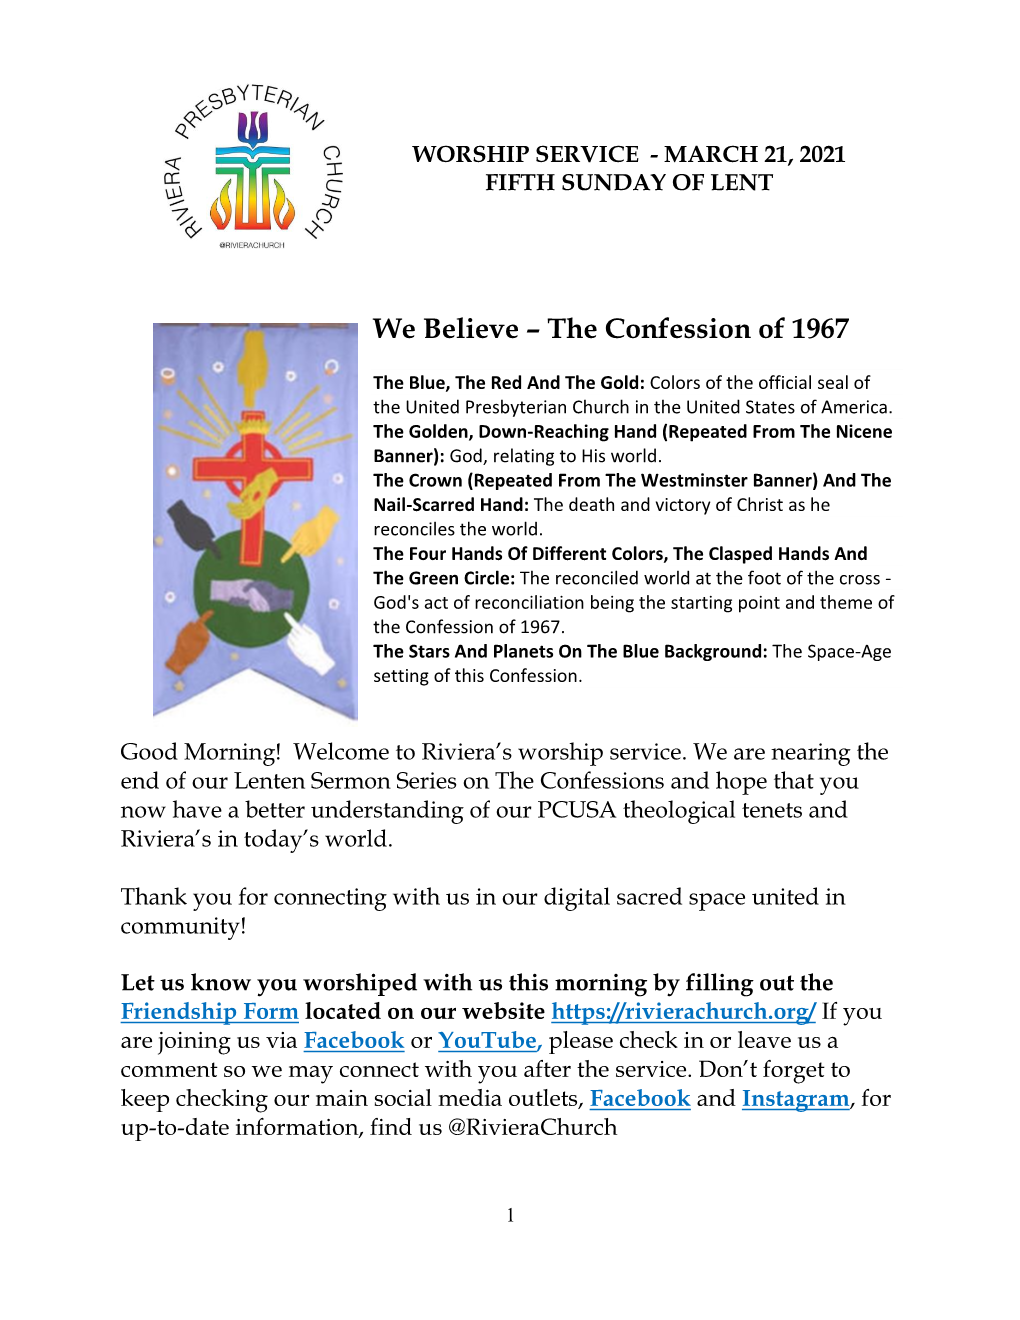 We Believe – the Confession of 1967